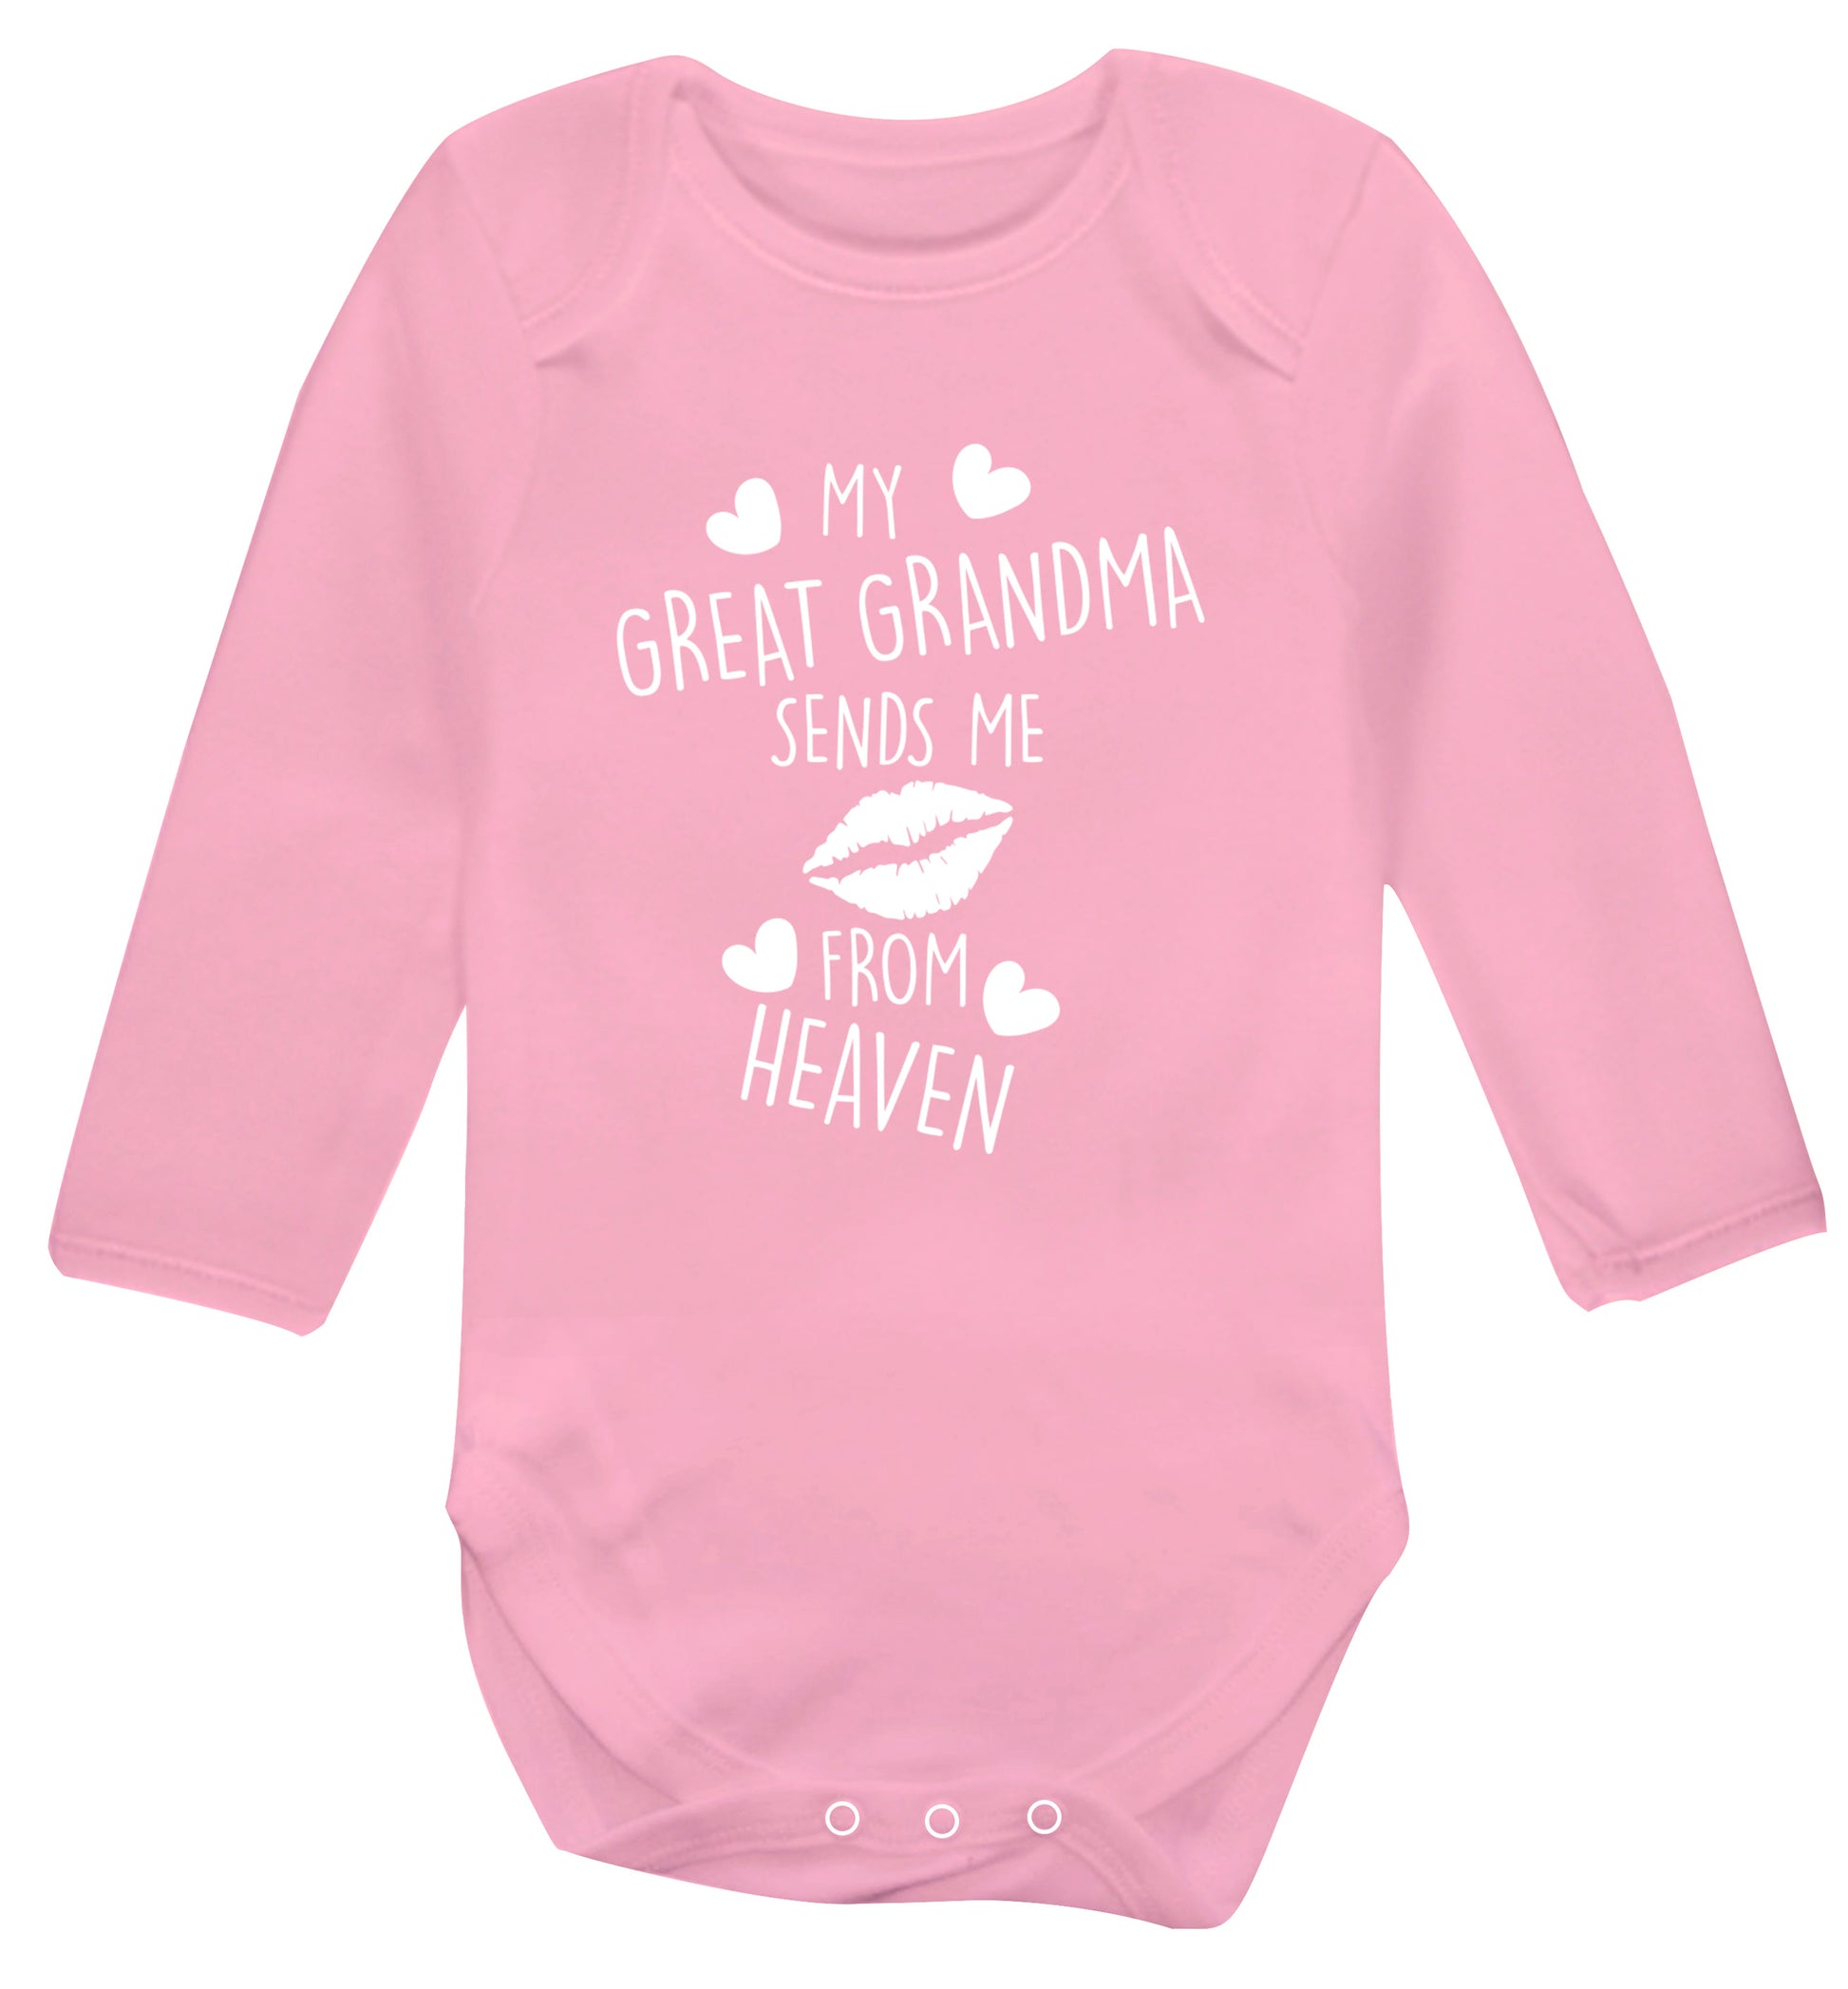 My great grandma sends me kisses from heaven Baby Vest long sleeved pale pink 6-12 months